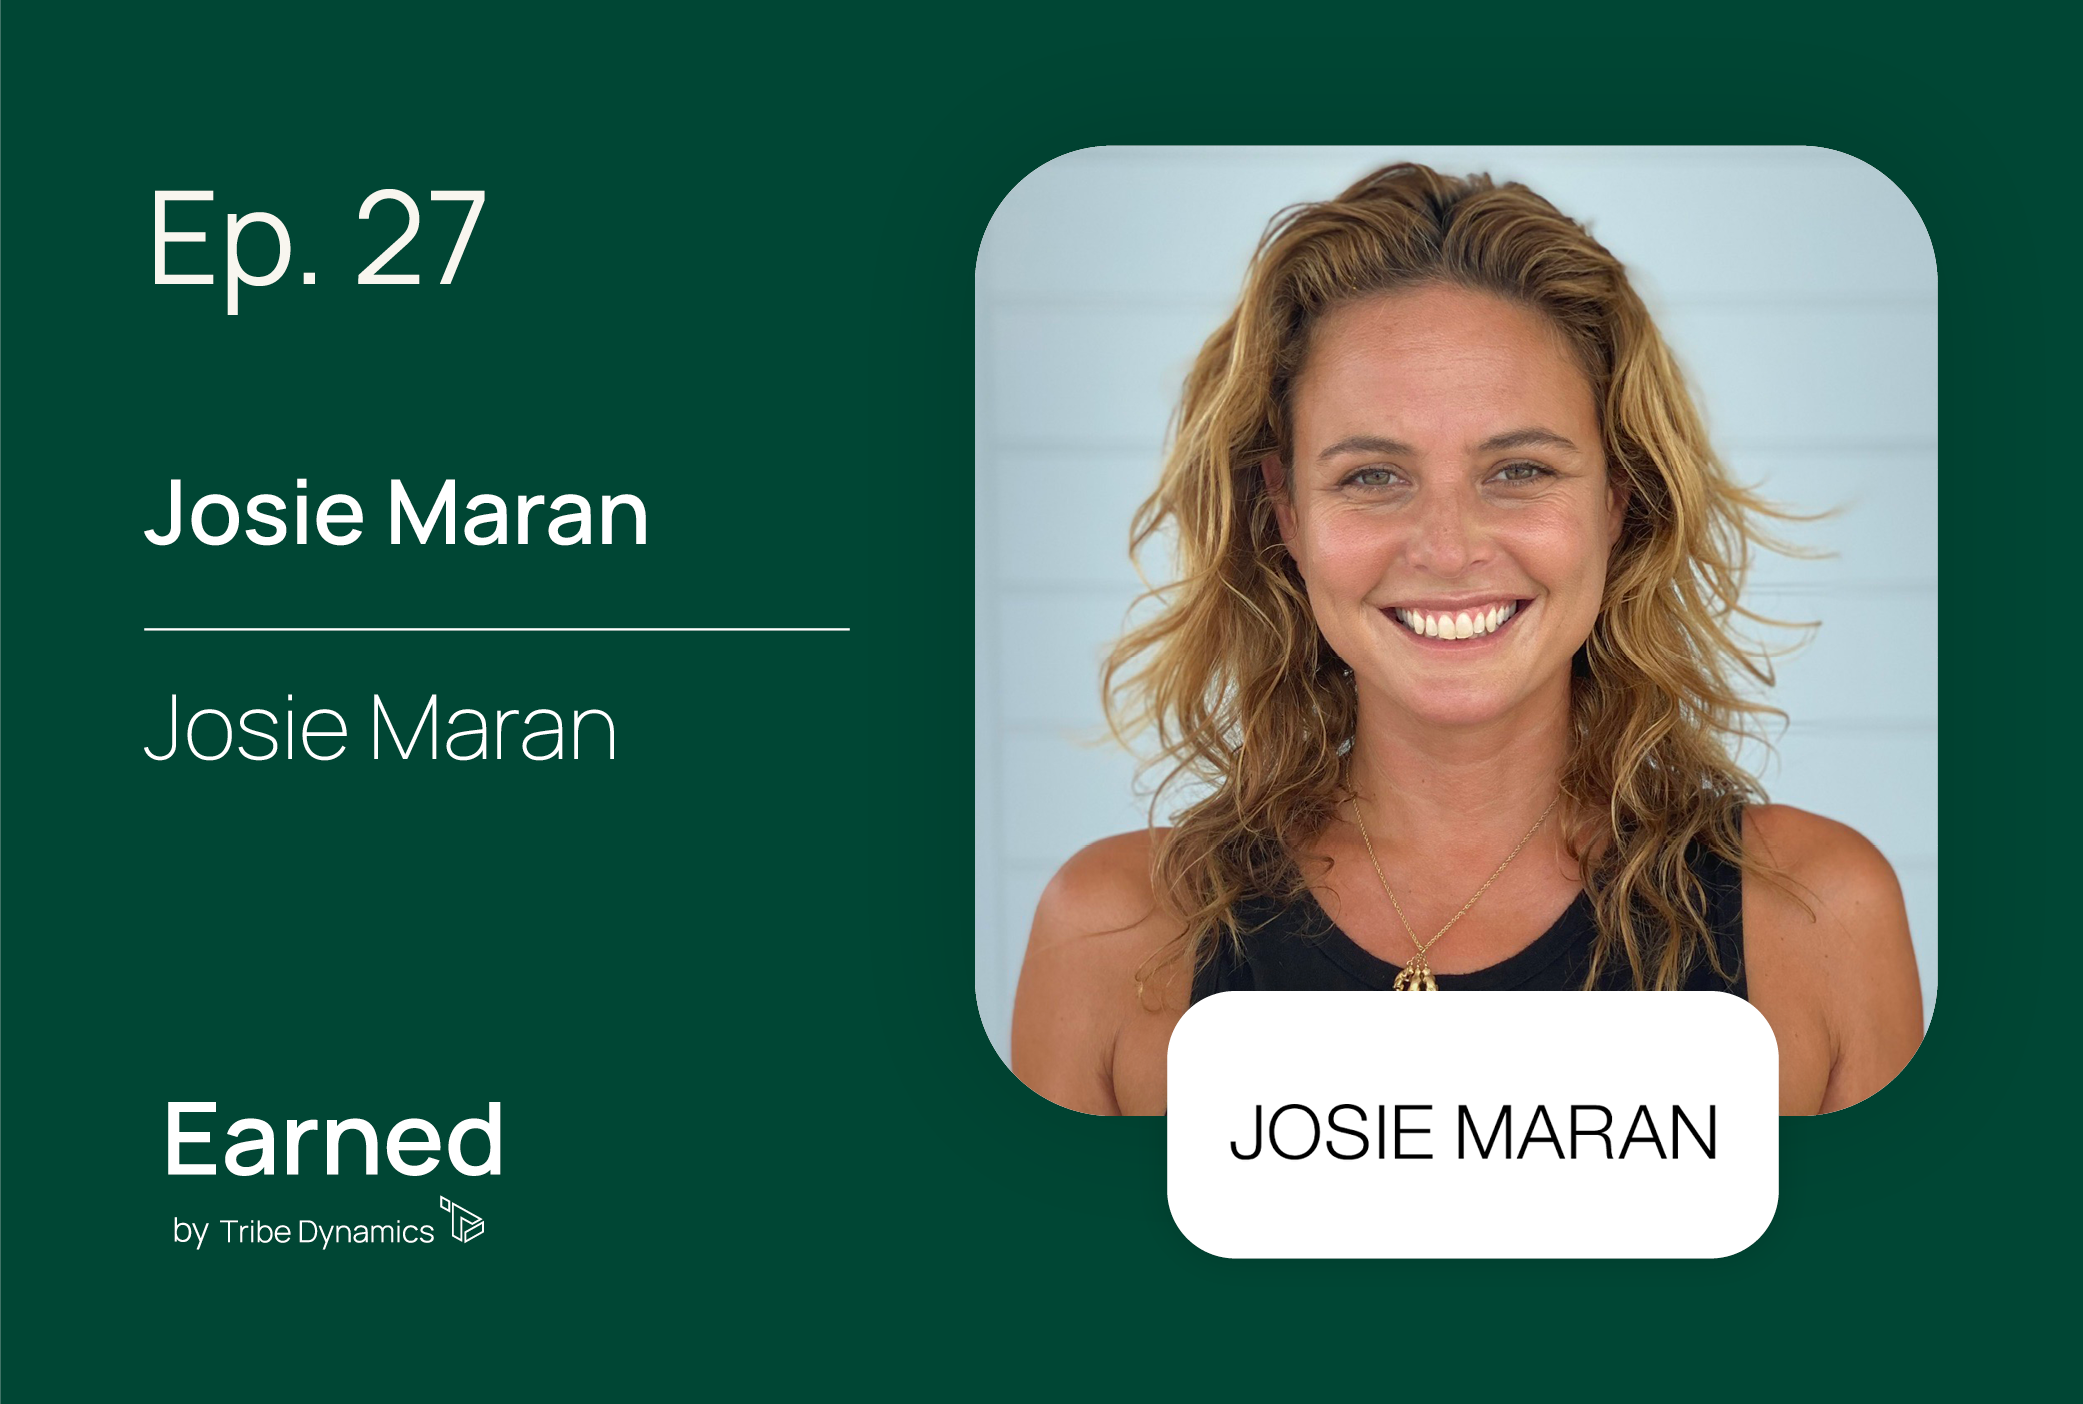 Earned Ep. 27: Josie Maran on Making the Beauty Industry “Healthier to the Planet and the People”